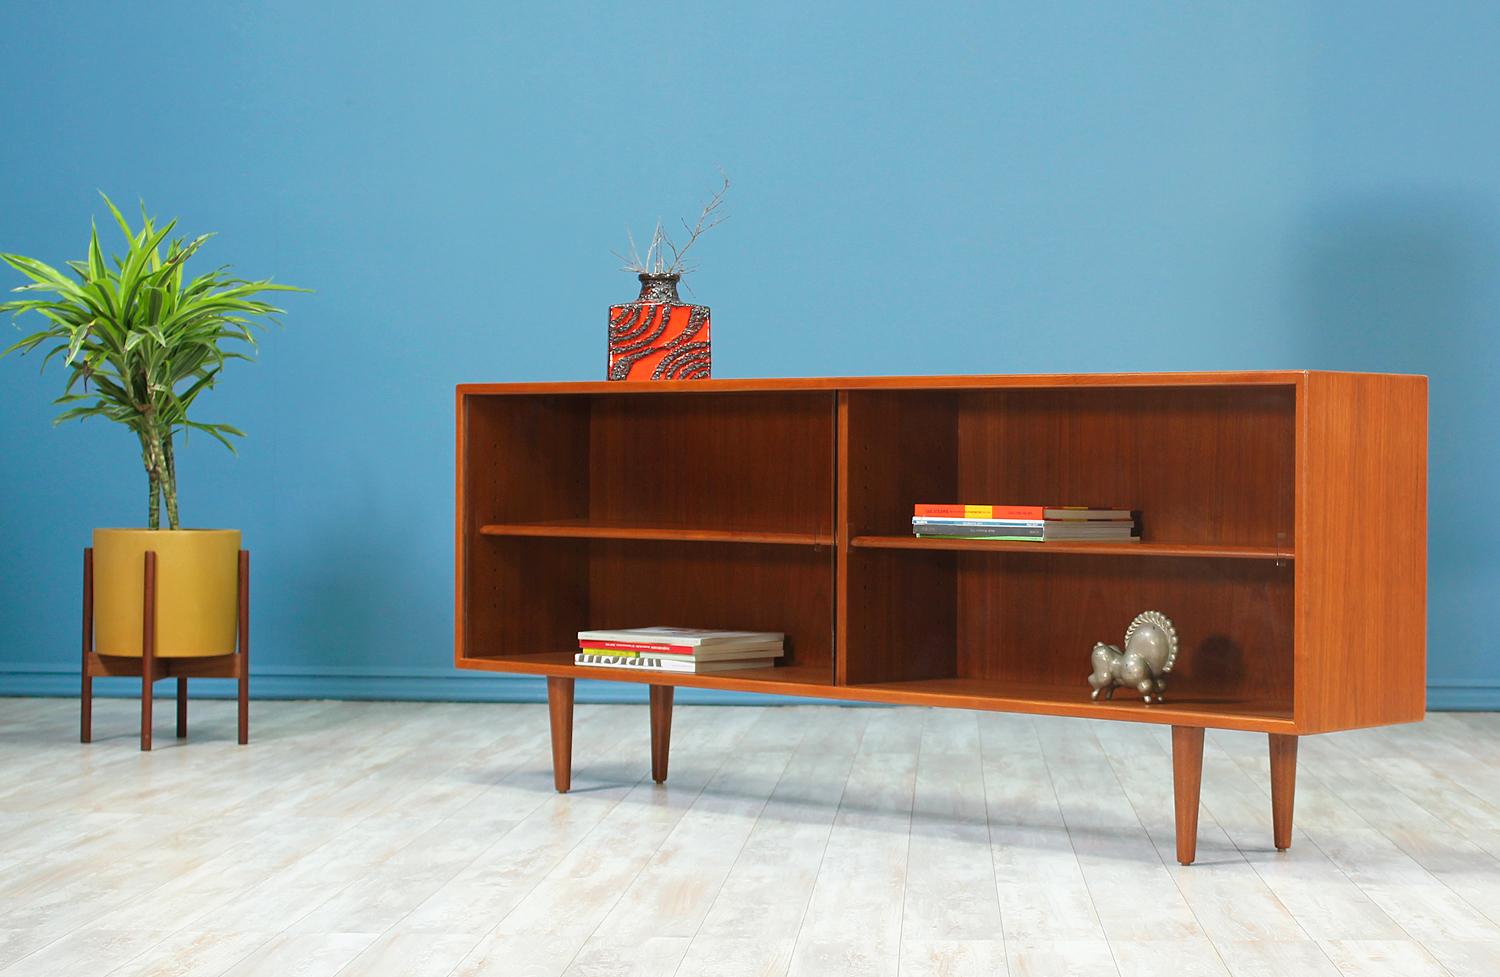 Danish Modern Display Case designed and manufactured in Denmark circa 1960’s. Beautifully crafted in rosewood, this stunning bookcase sits on 8” tapered legs and features two compartments with removable glass shelves. The glass doors permit the